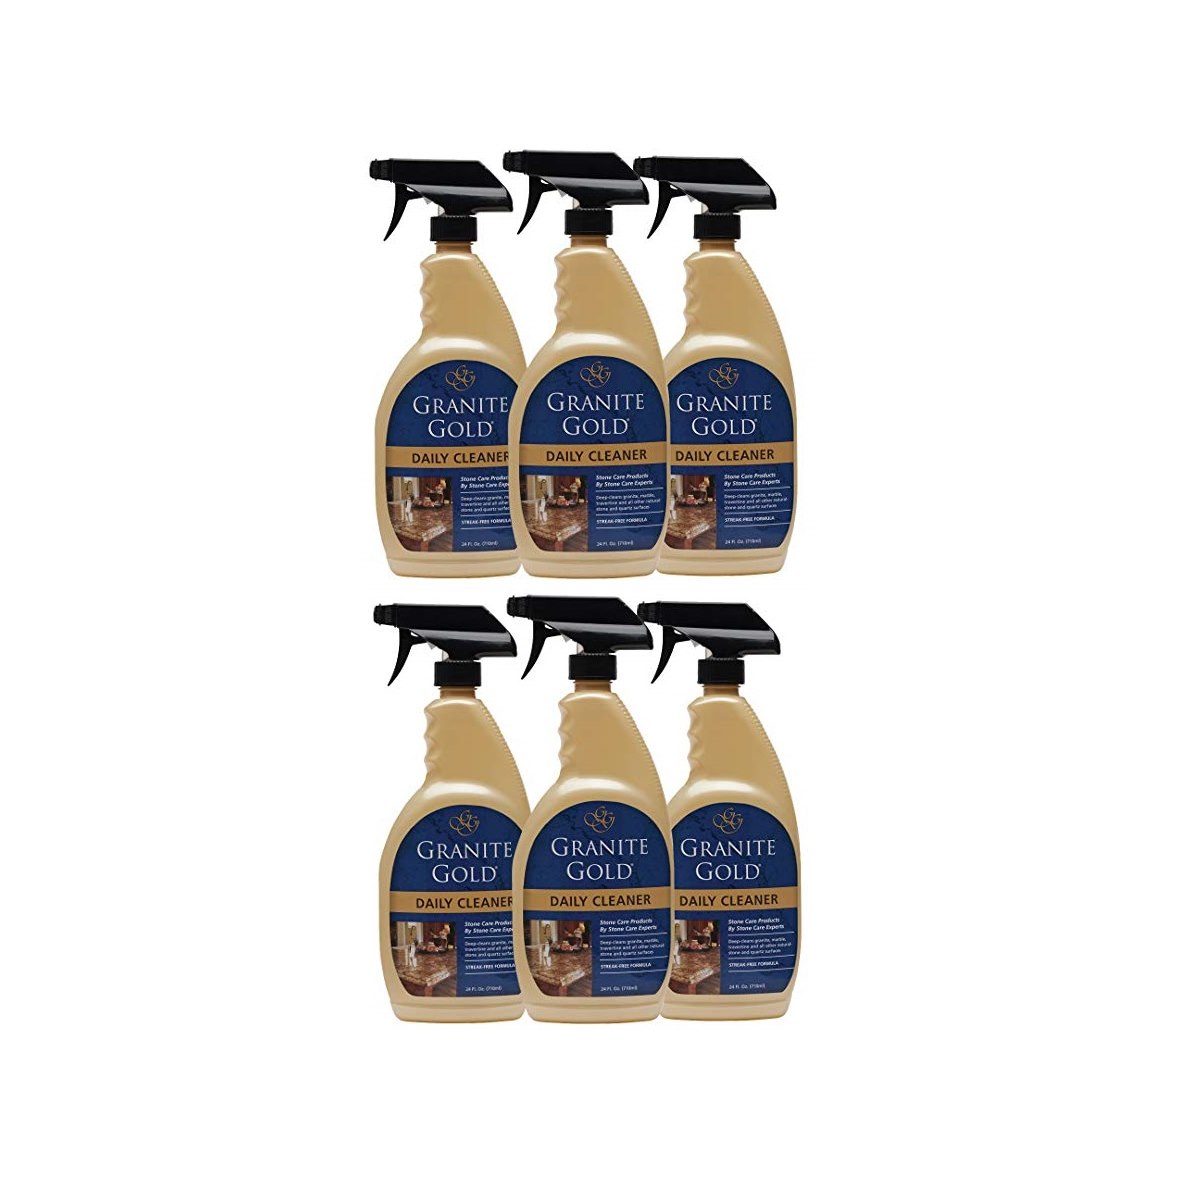 Case of 6 x Granite Gold Daily Cleaner Spray 710ml